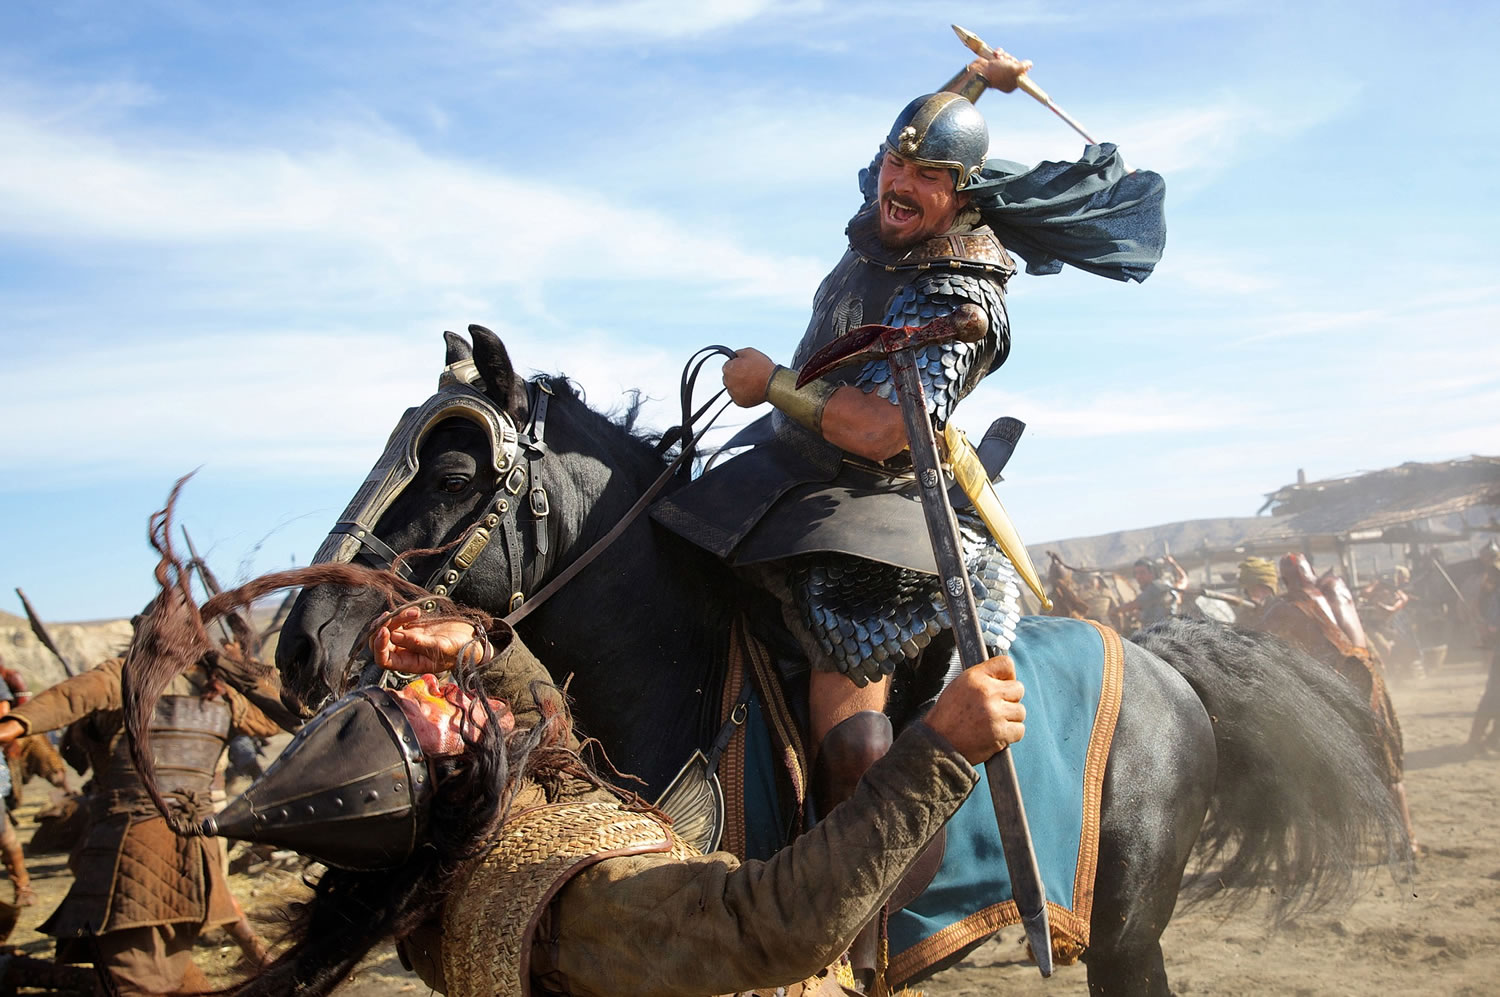 Christian Bale rides into action as Moses in &quot;Exodus: Gods and Kings.&quot;
Kerry Brown
20th Century Fox